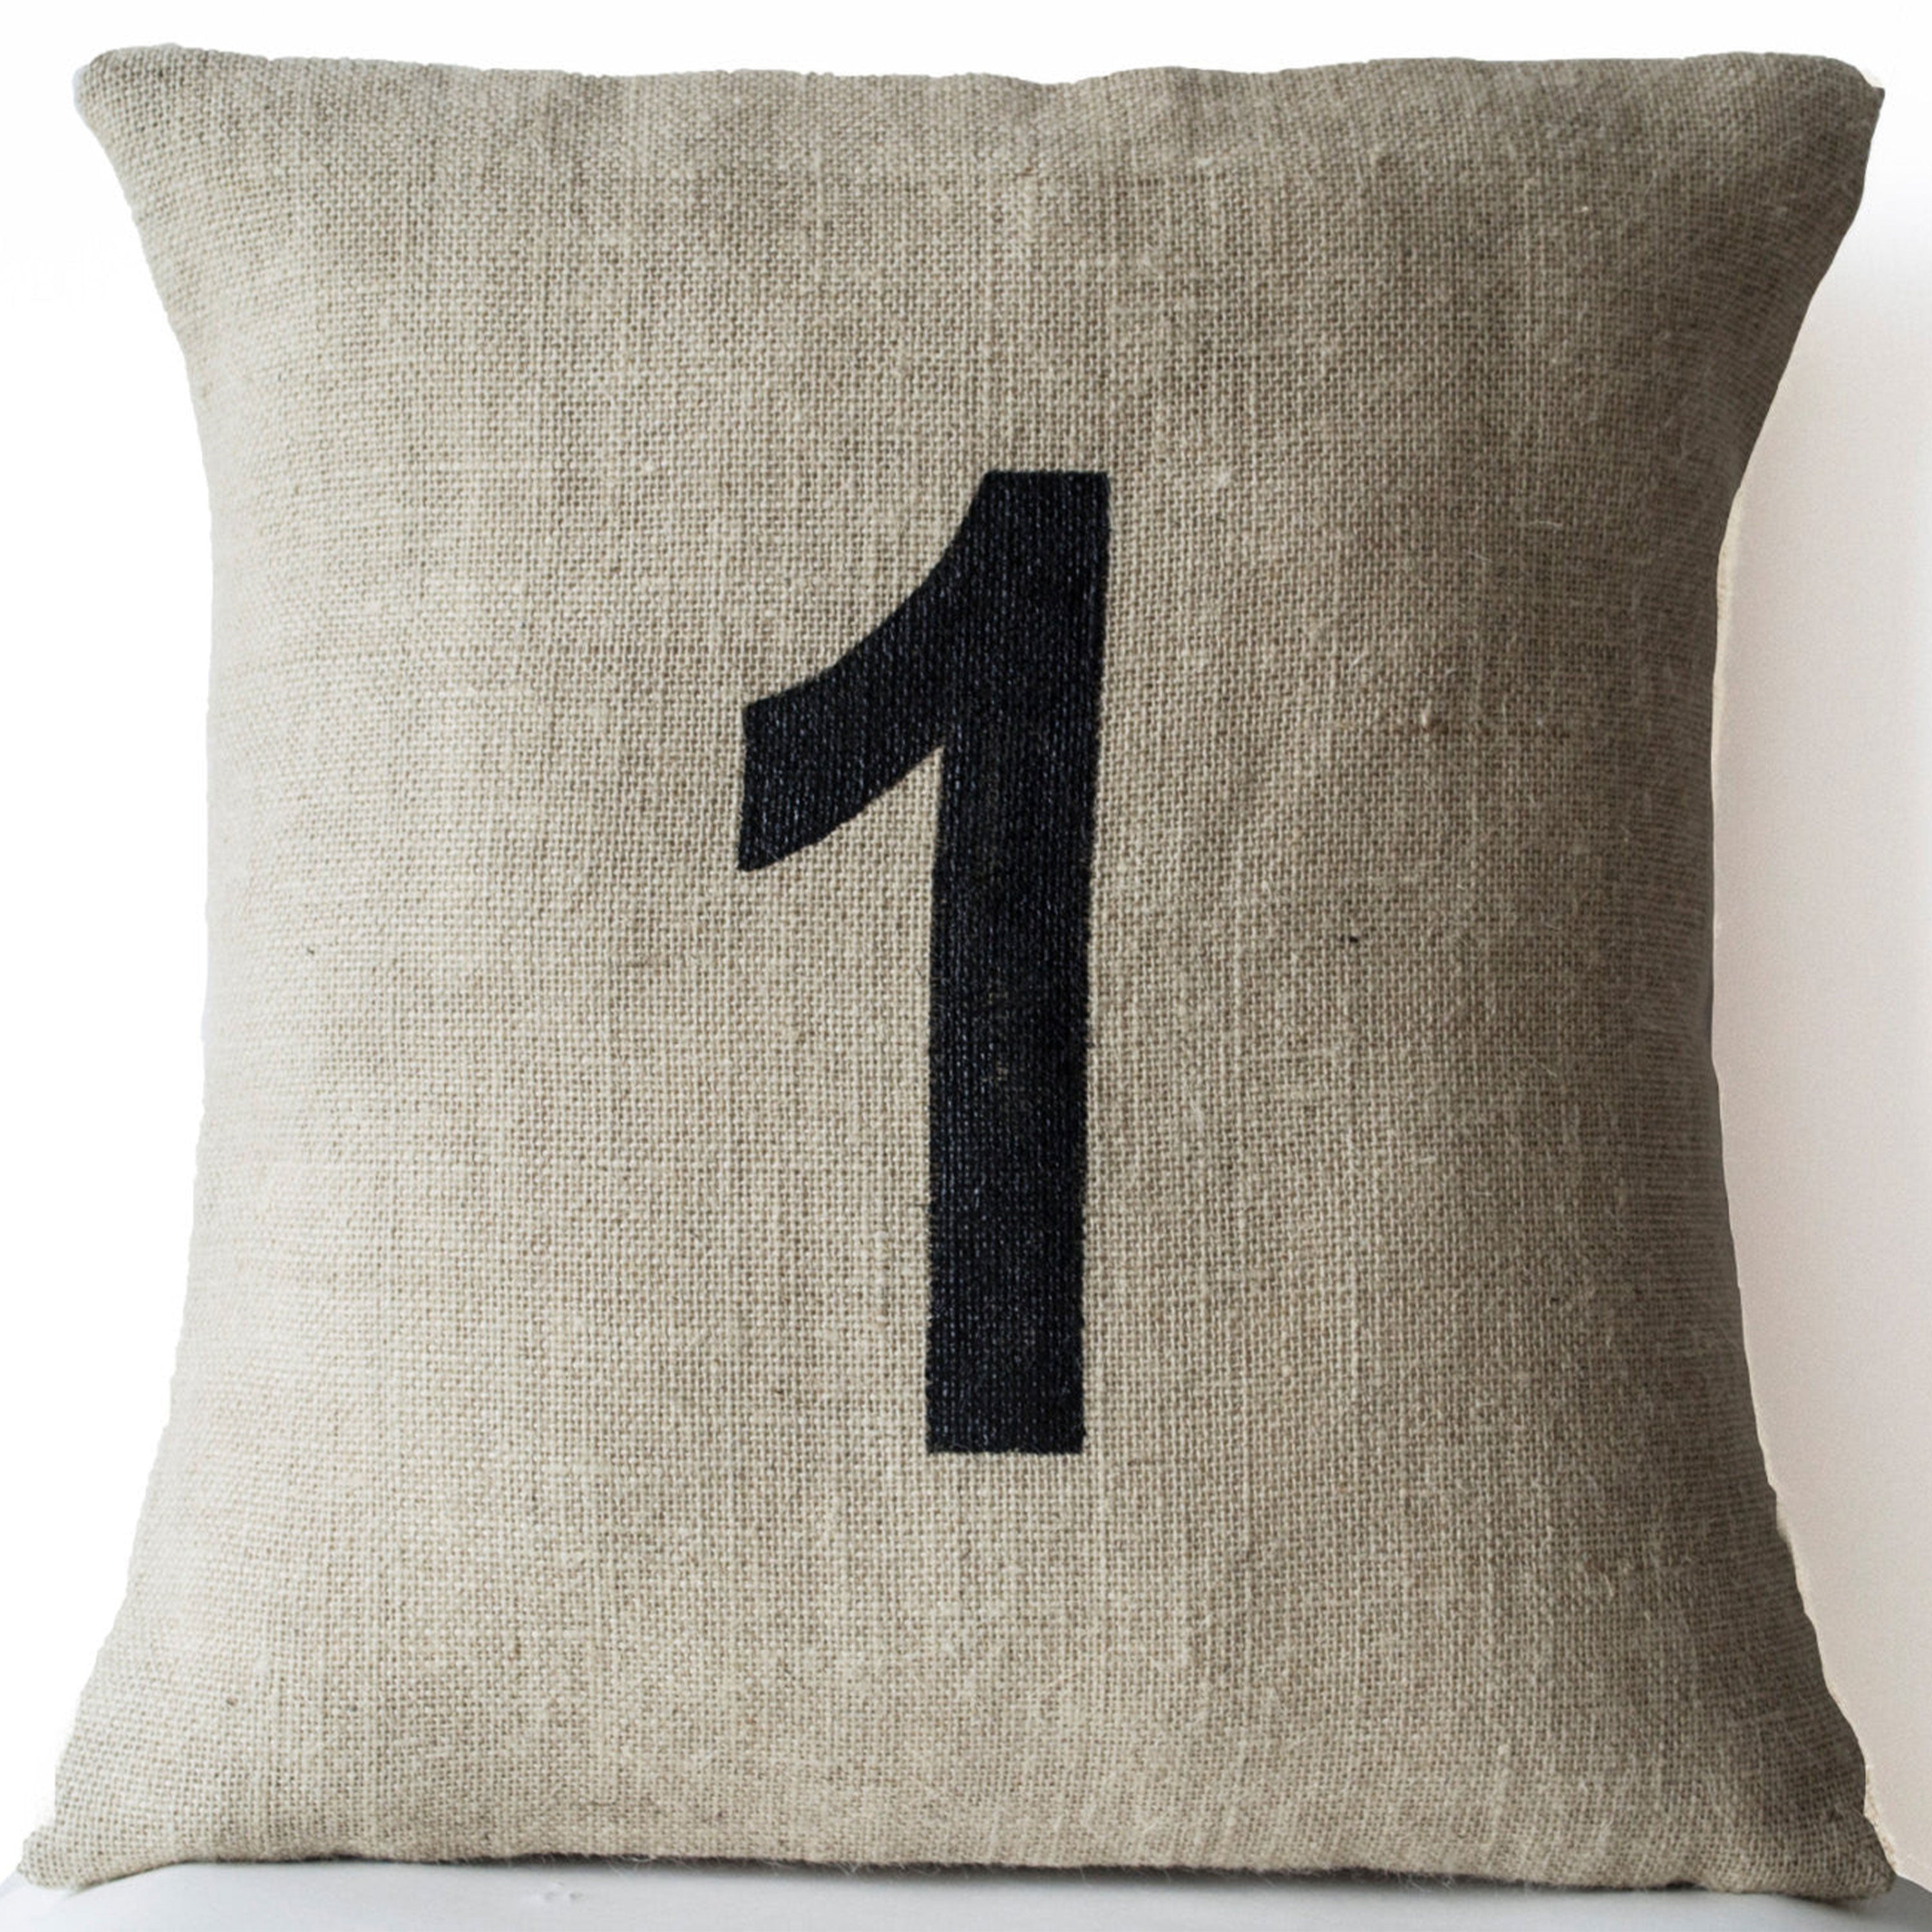 Burlap Number Pillows Customized Hand Painted Numeric Pillows Personalized Dorm Cushion